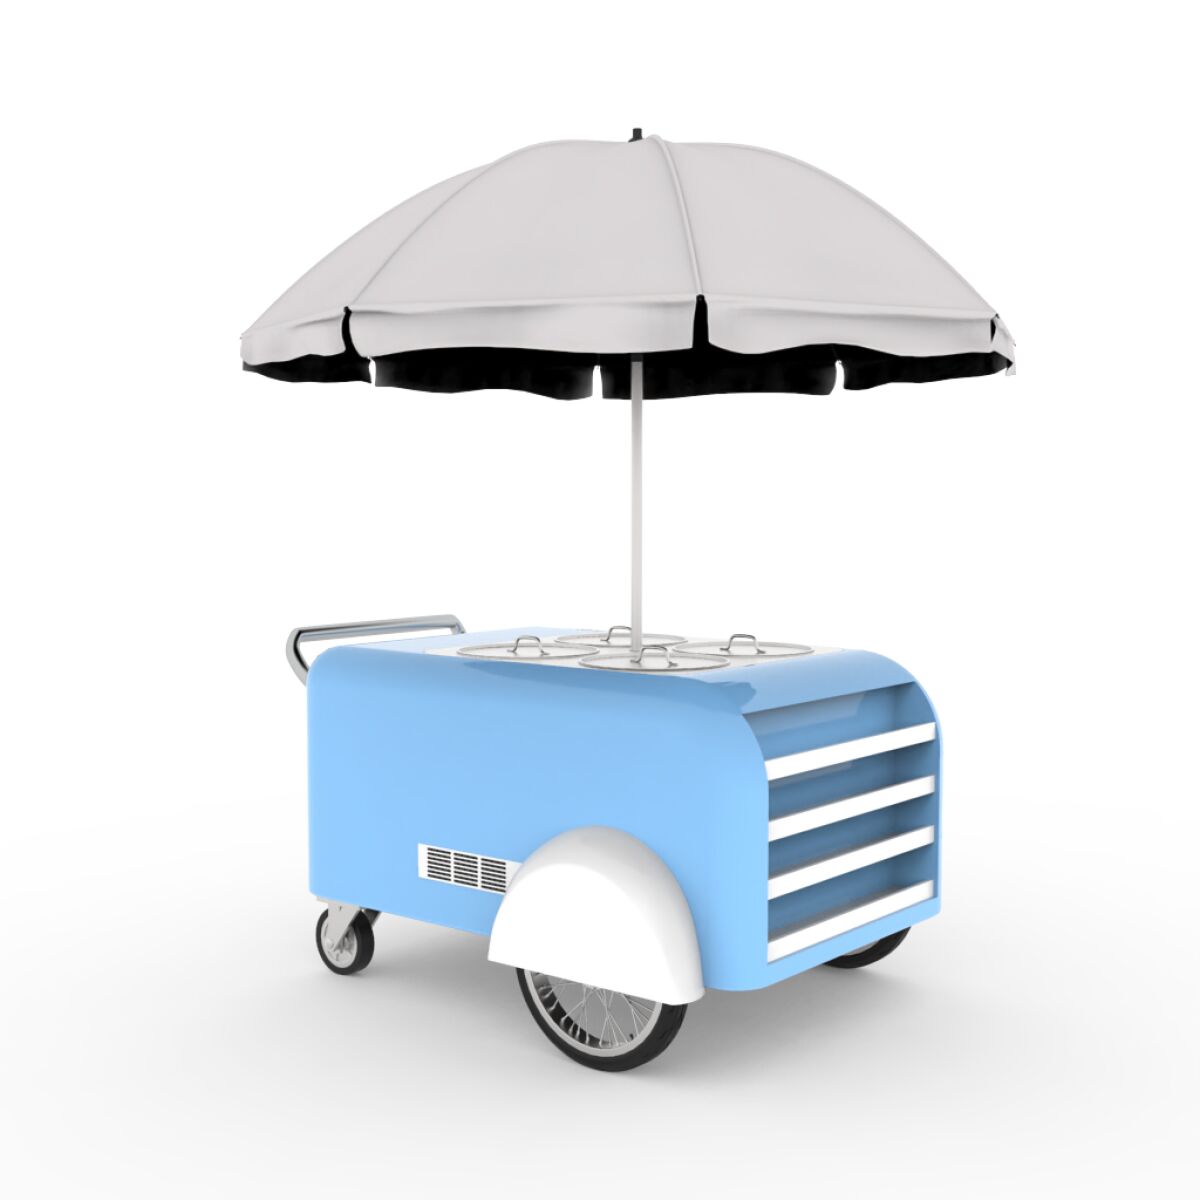 A curving, baby blue cart with four steam containers and an umbrella.